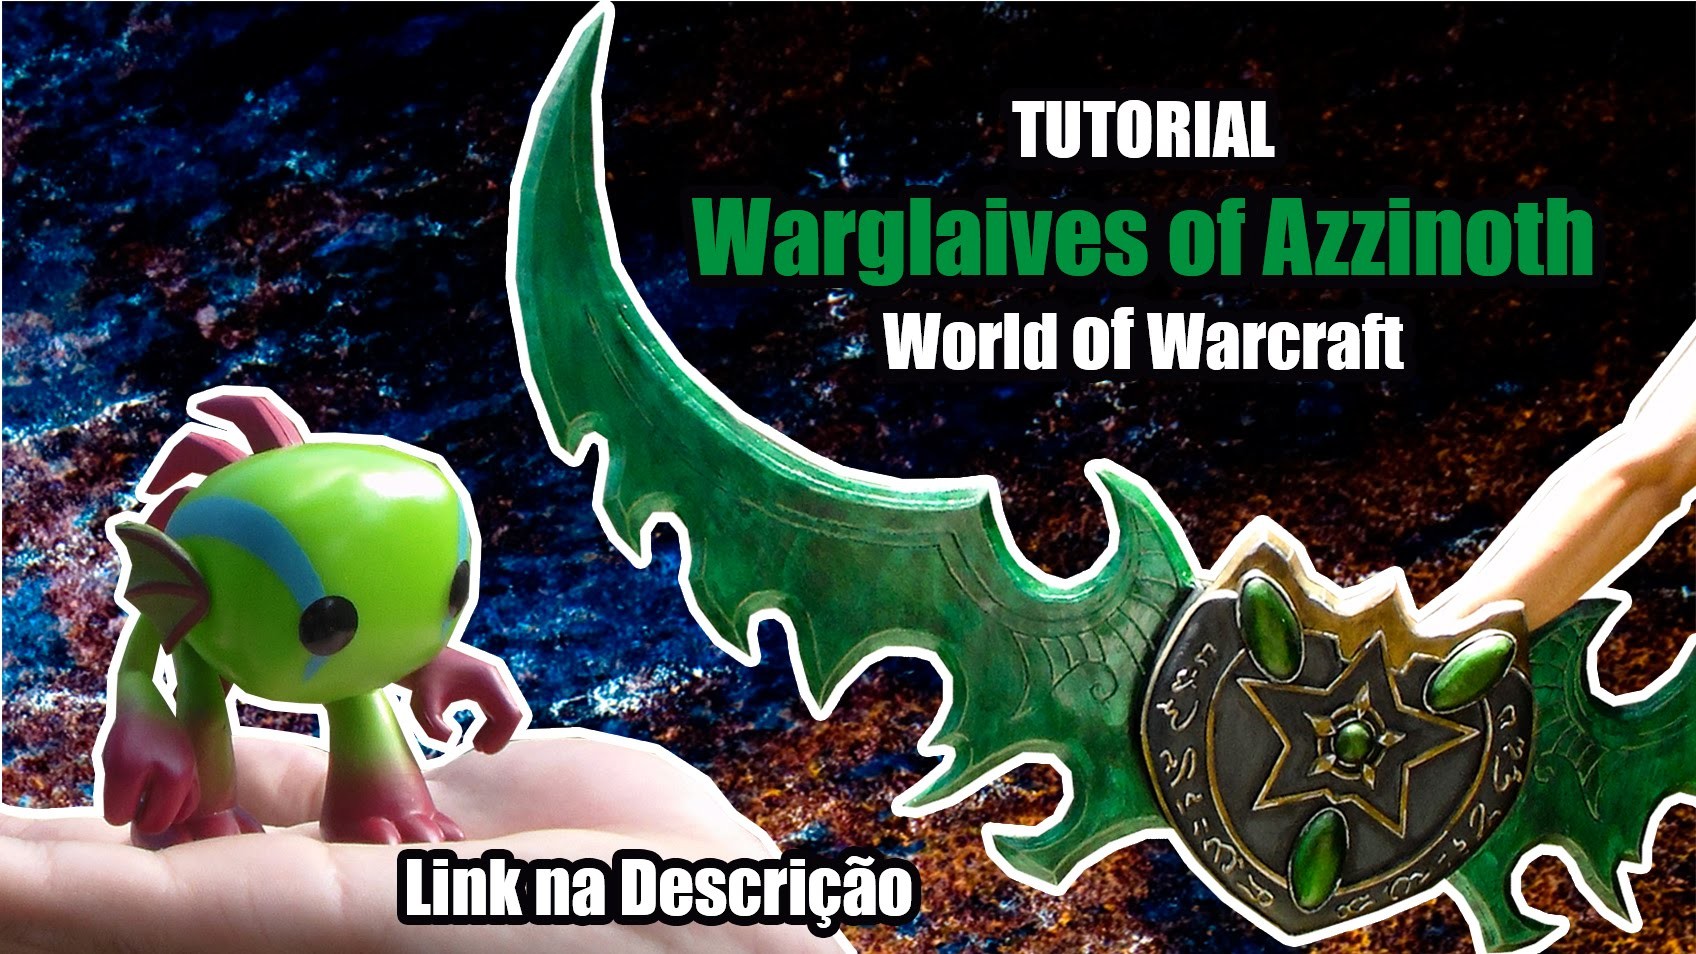 D.I.Y. Como fazer a Warglaive of Azzinoth do Illidan (World of Warcraft) - Kmaker Tutorial